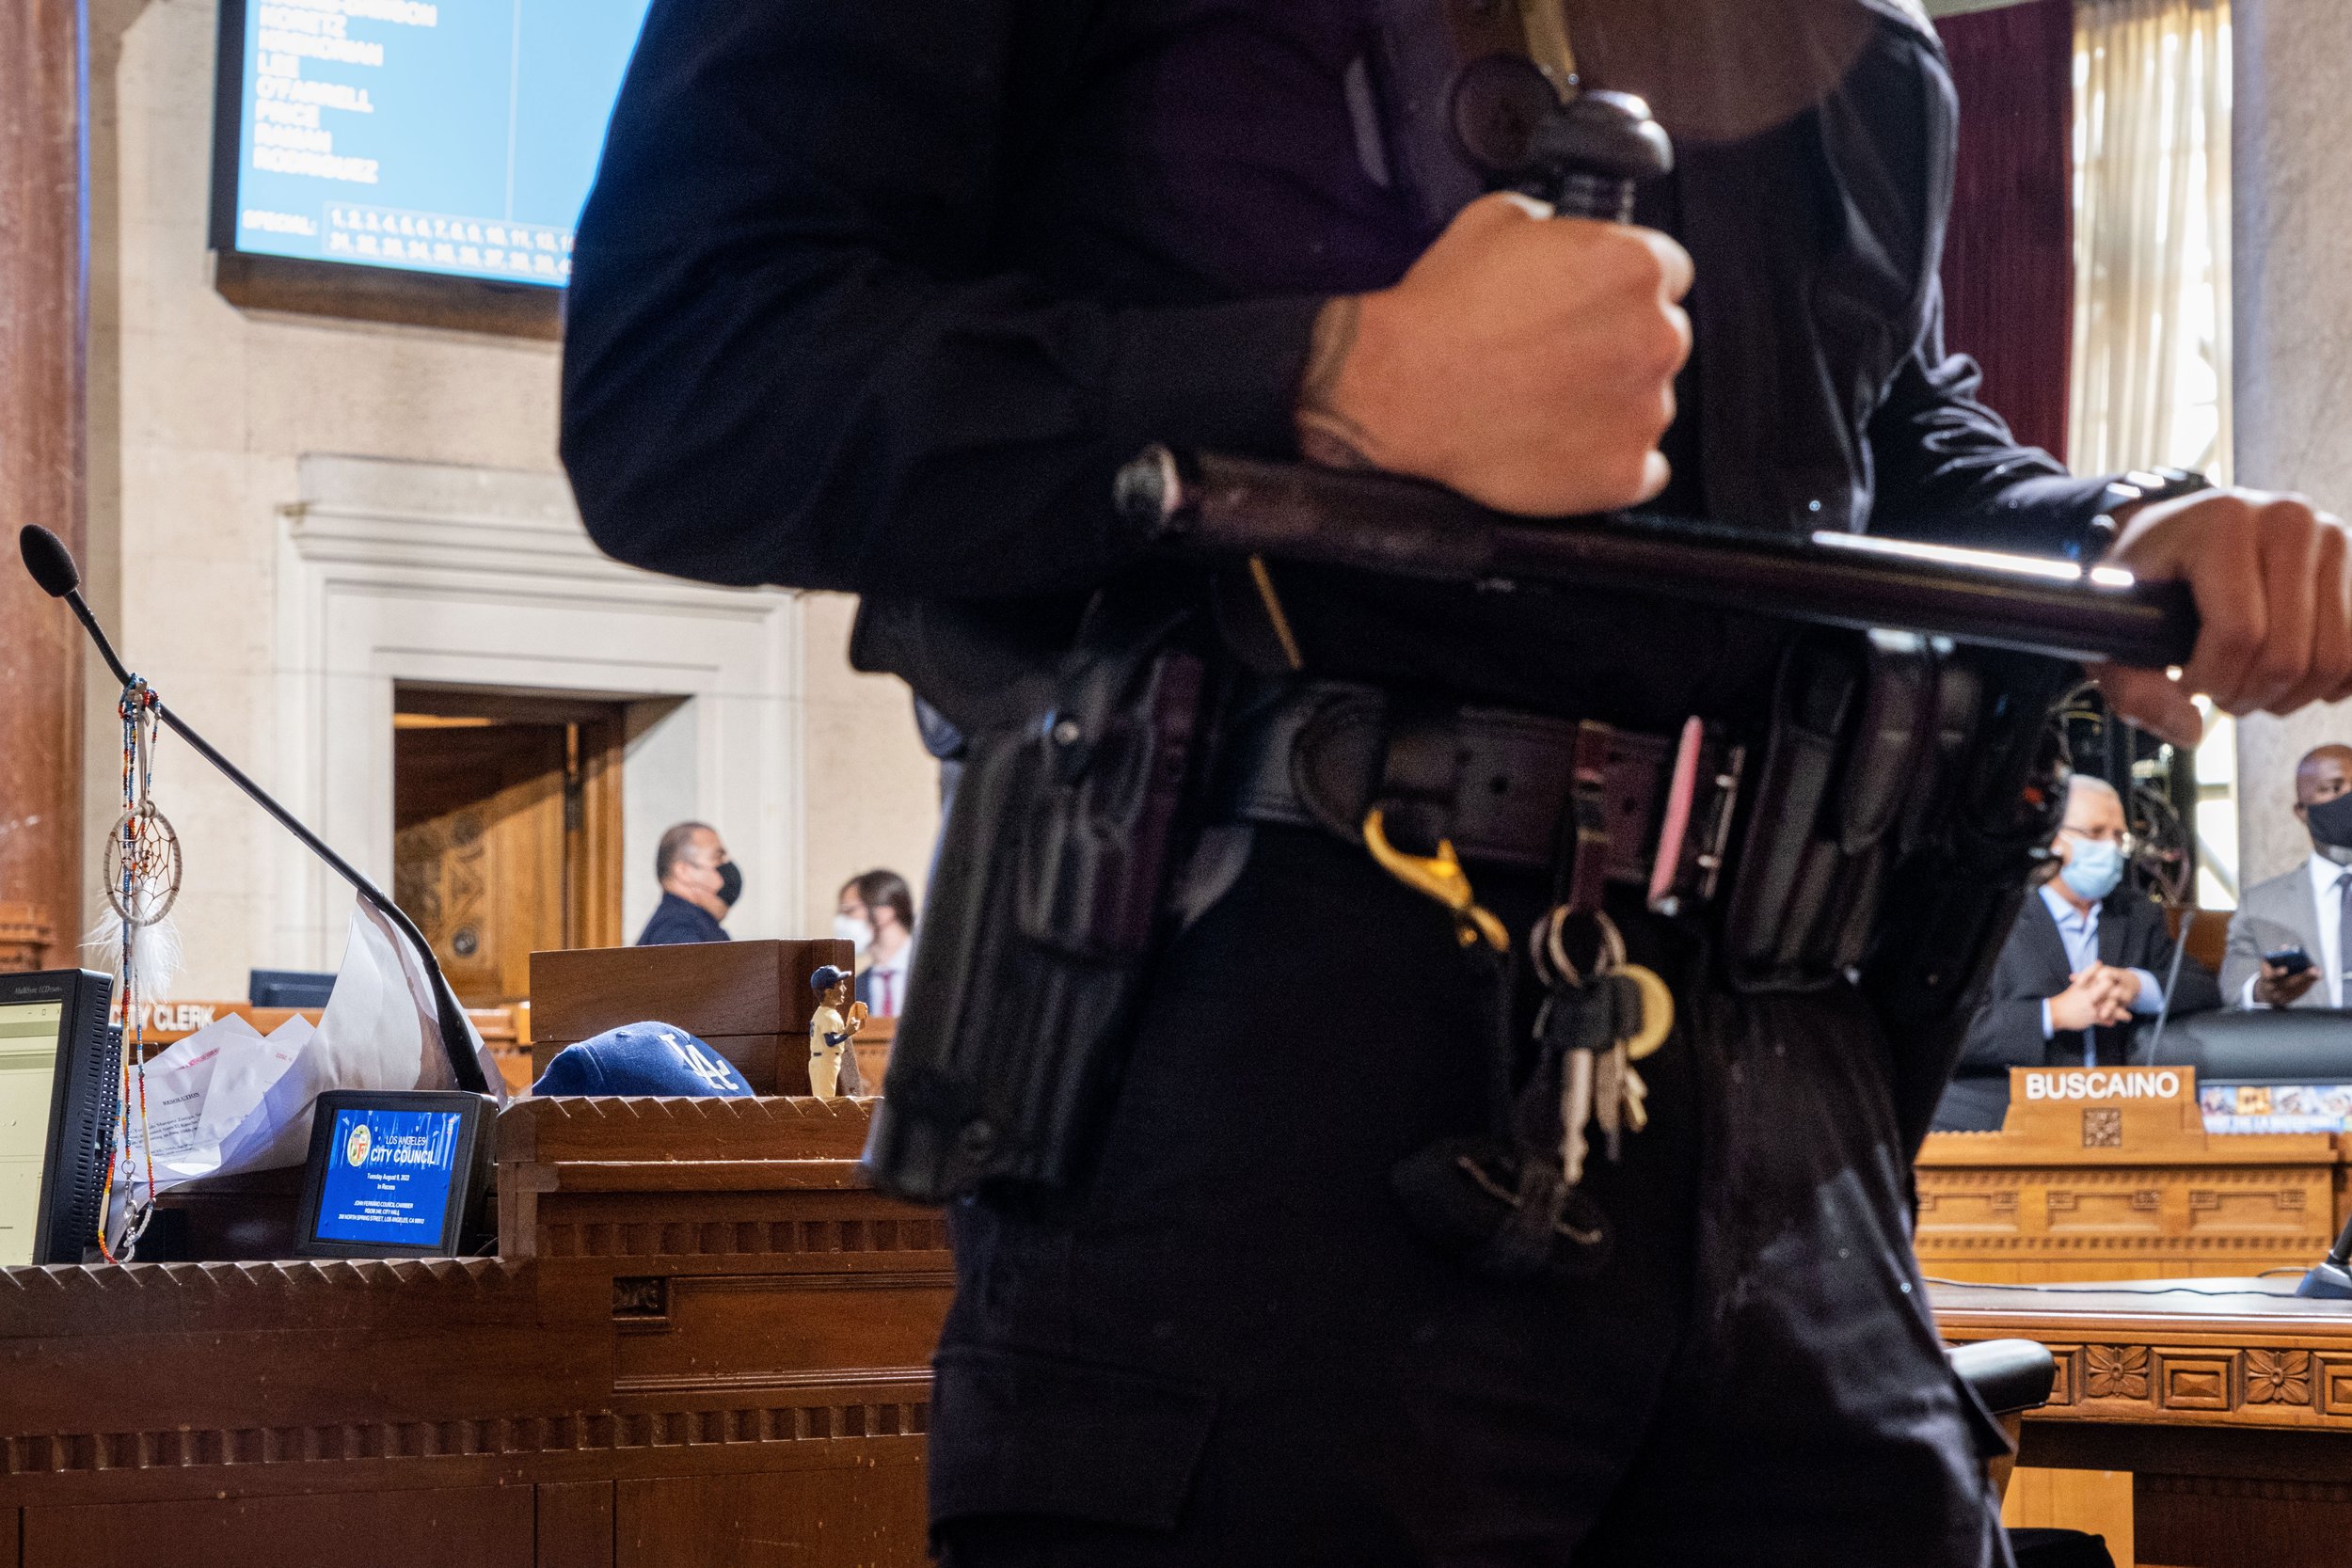  A police officer stands by after two attendees at the public hearing were detained. Los Angeles City Hall on August 9, 2022. (Anna Sophia Moltke | The Corsair) 